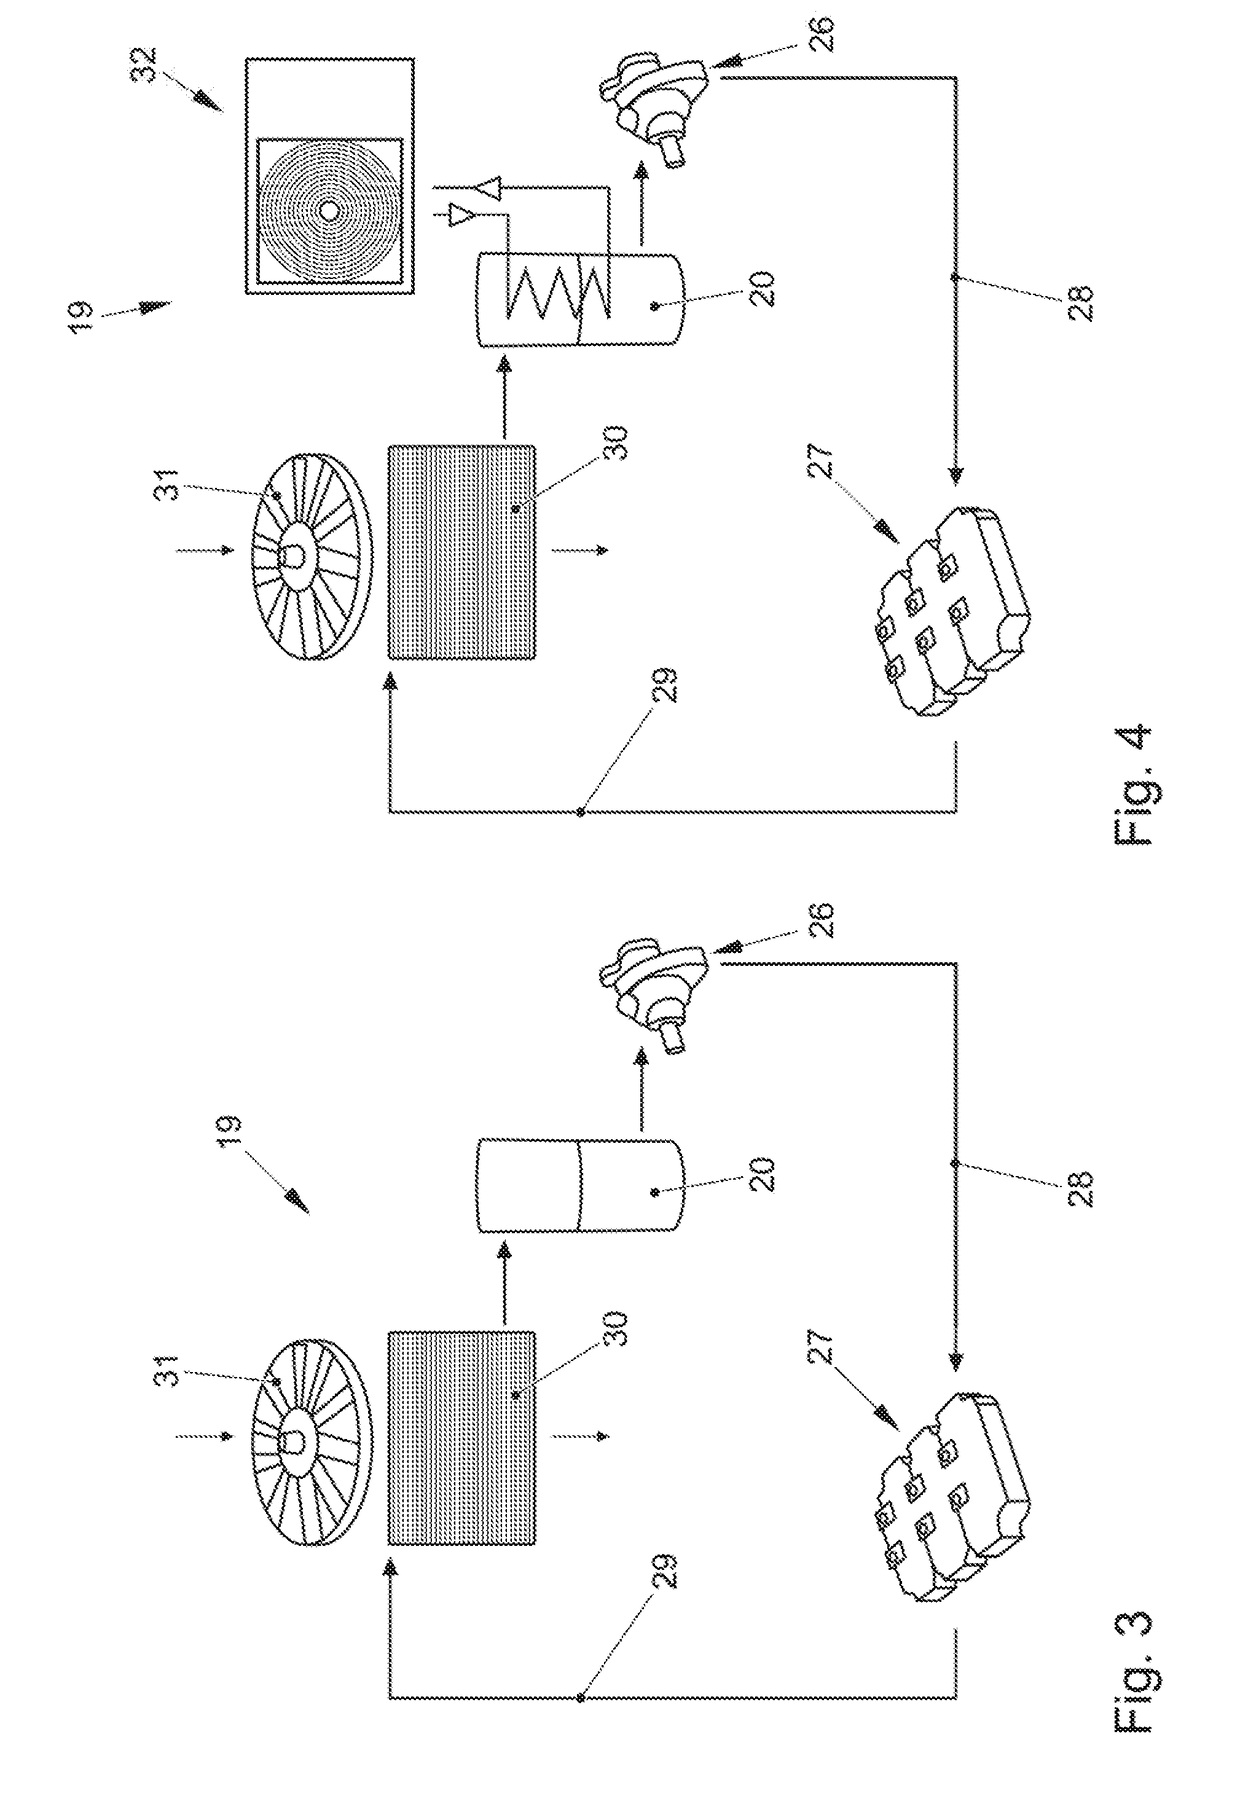 Charging system for electric vehicles